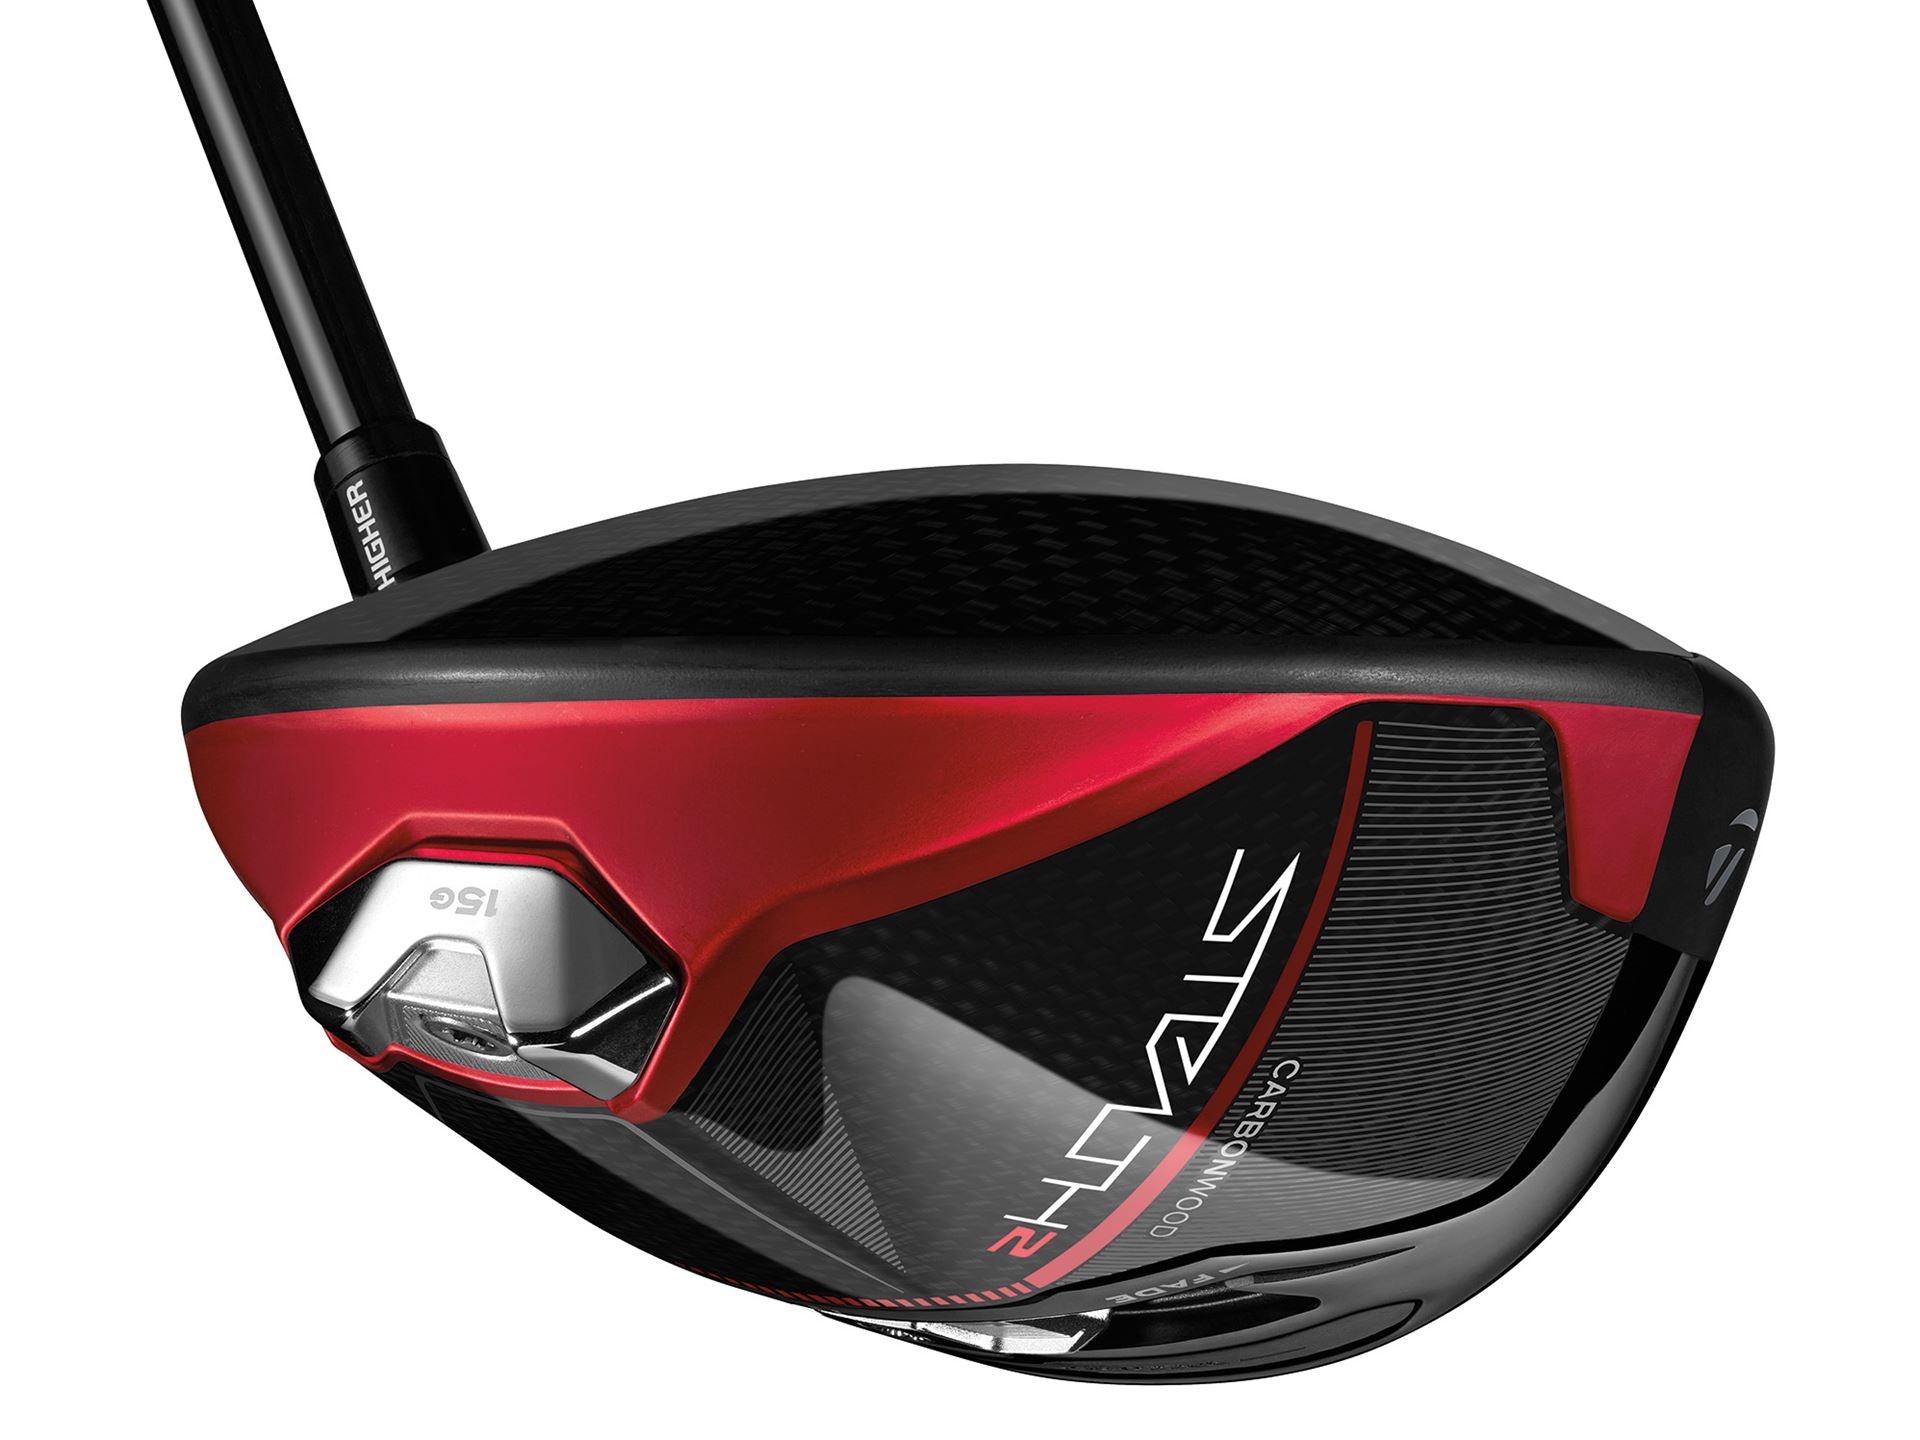 More Carbon, More Fargiveness: Introducing the TaylorMade Stealth 2 Driver